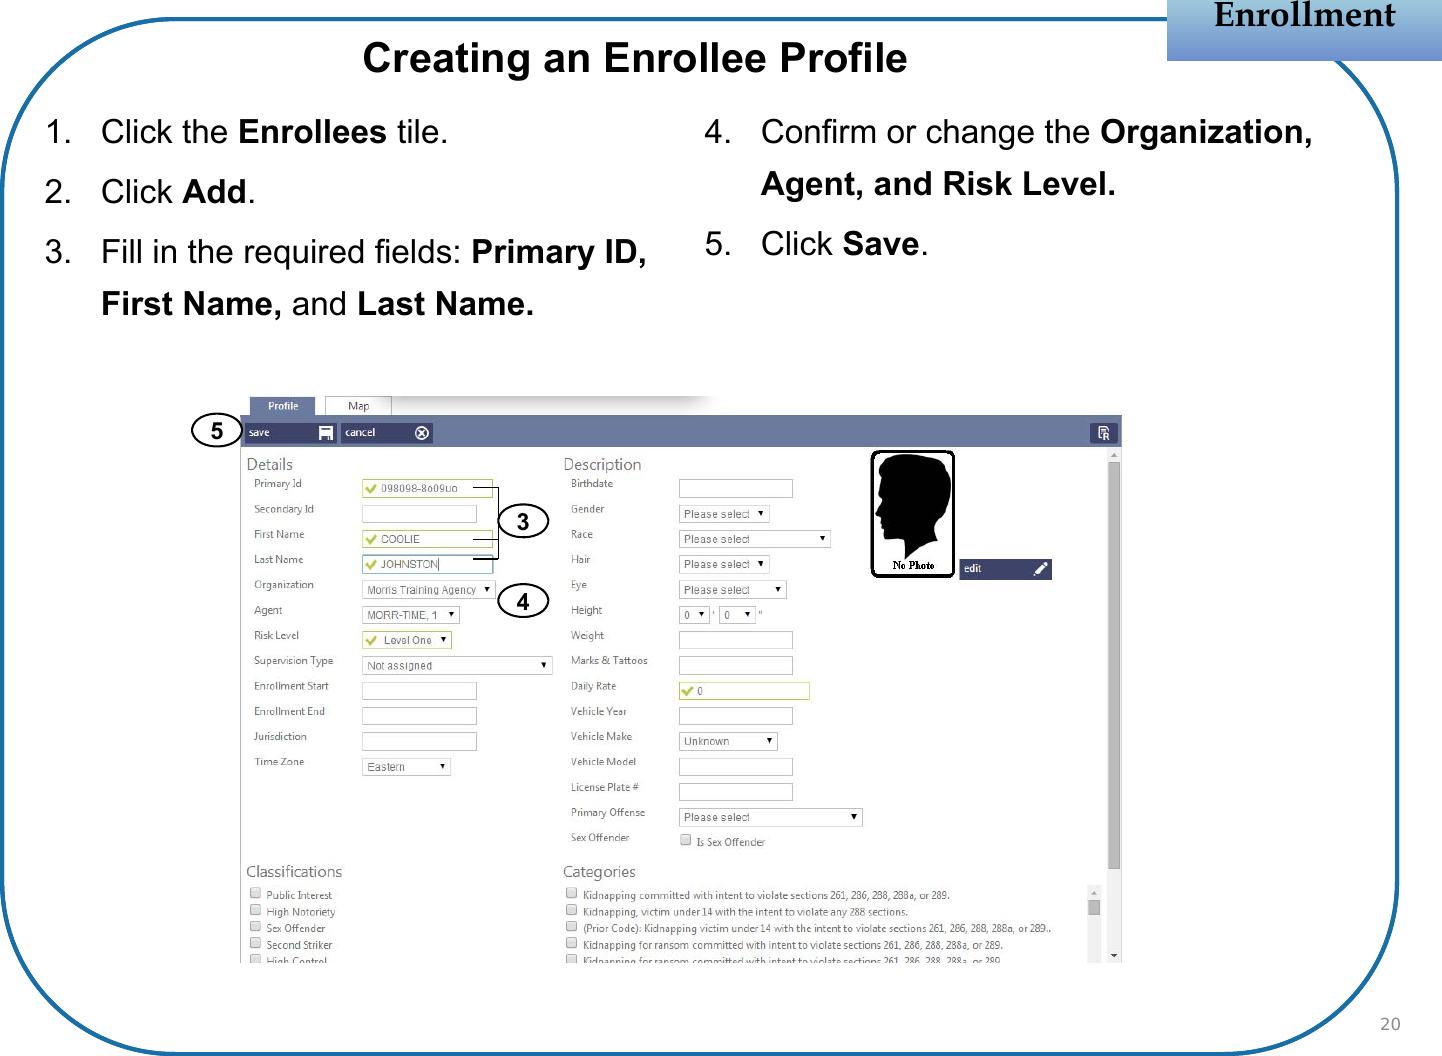 1. Click the Enrollees tile.2. Click Add.3. Fill in the required fields: Primary ID, First Name, and Last Name.4. Confirm or change the Organization, Agent, and Risk Level.5. Click Save.EnrollmentEnrollmentCreating an Enrollee Profile34205